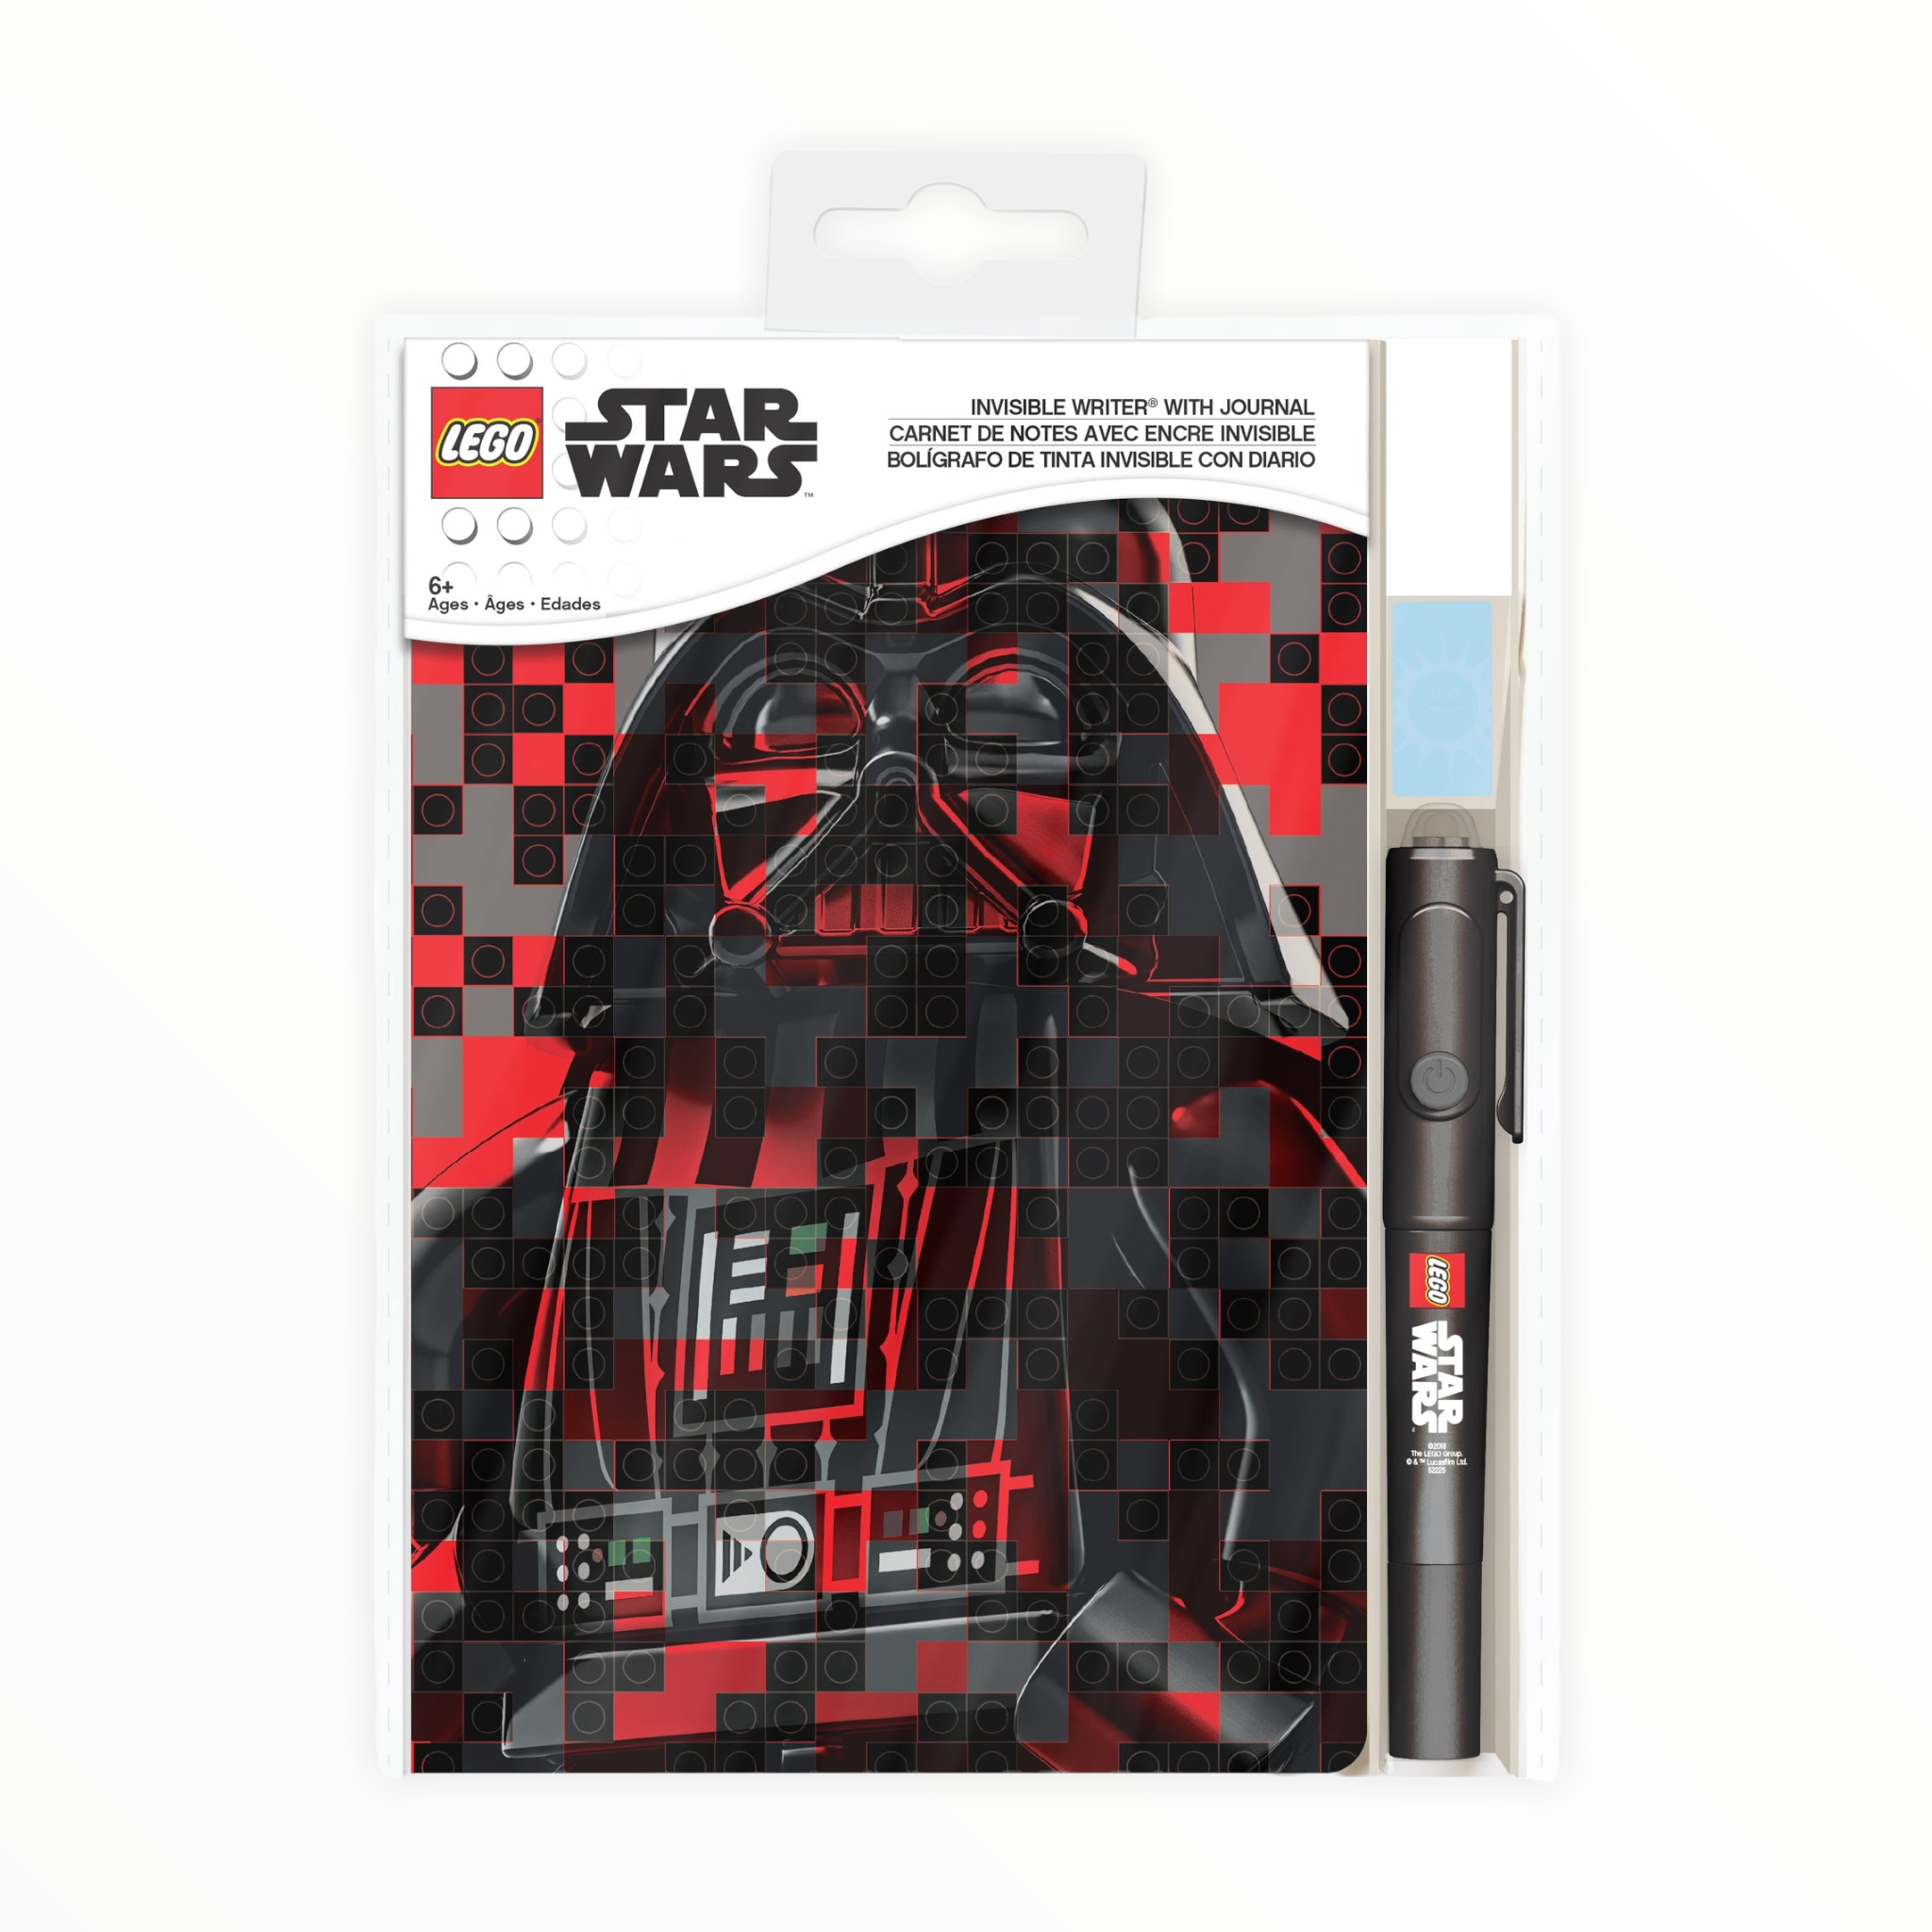 LEGO Star Wars Invisible Writer Set (pen and journal)